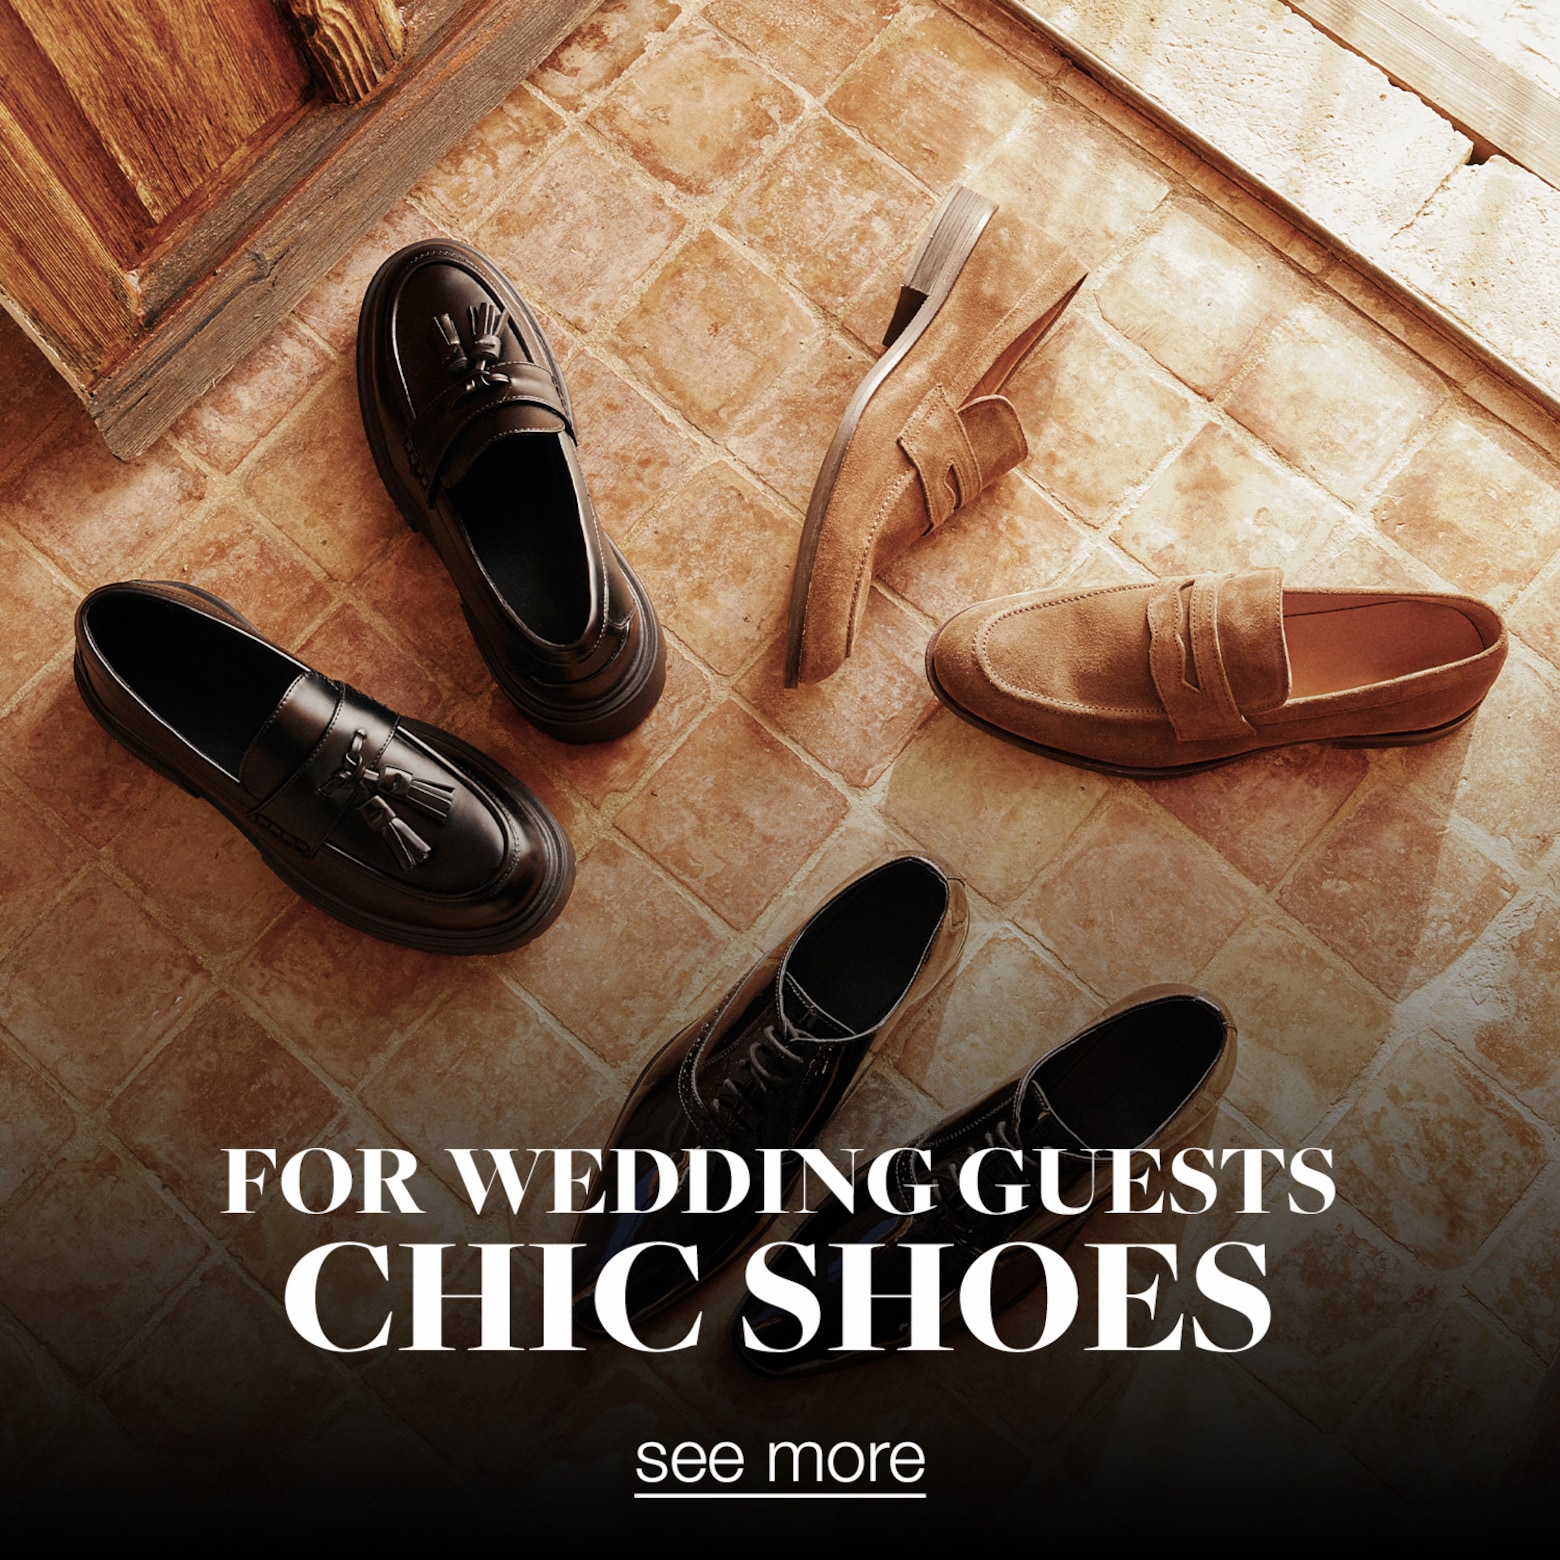 Our curated selection The wedding guest shop